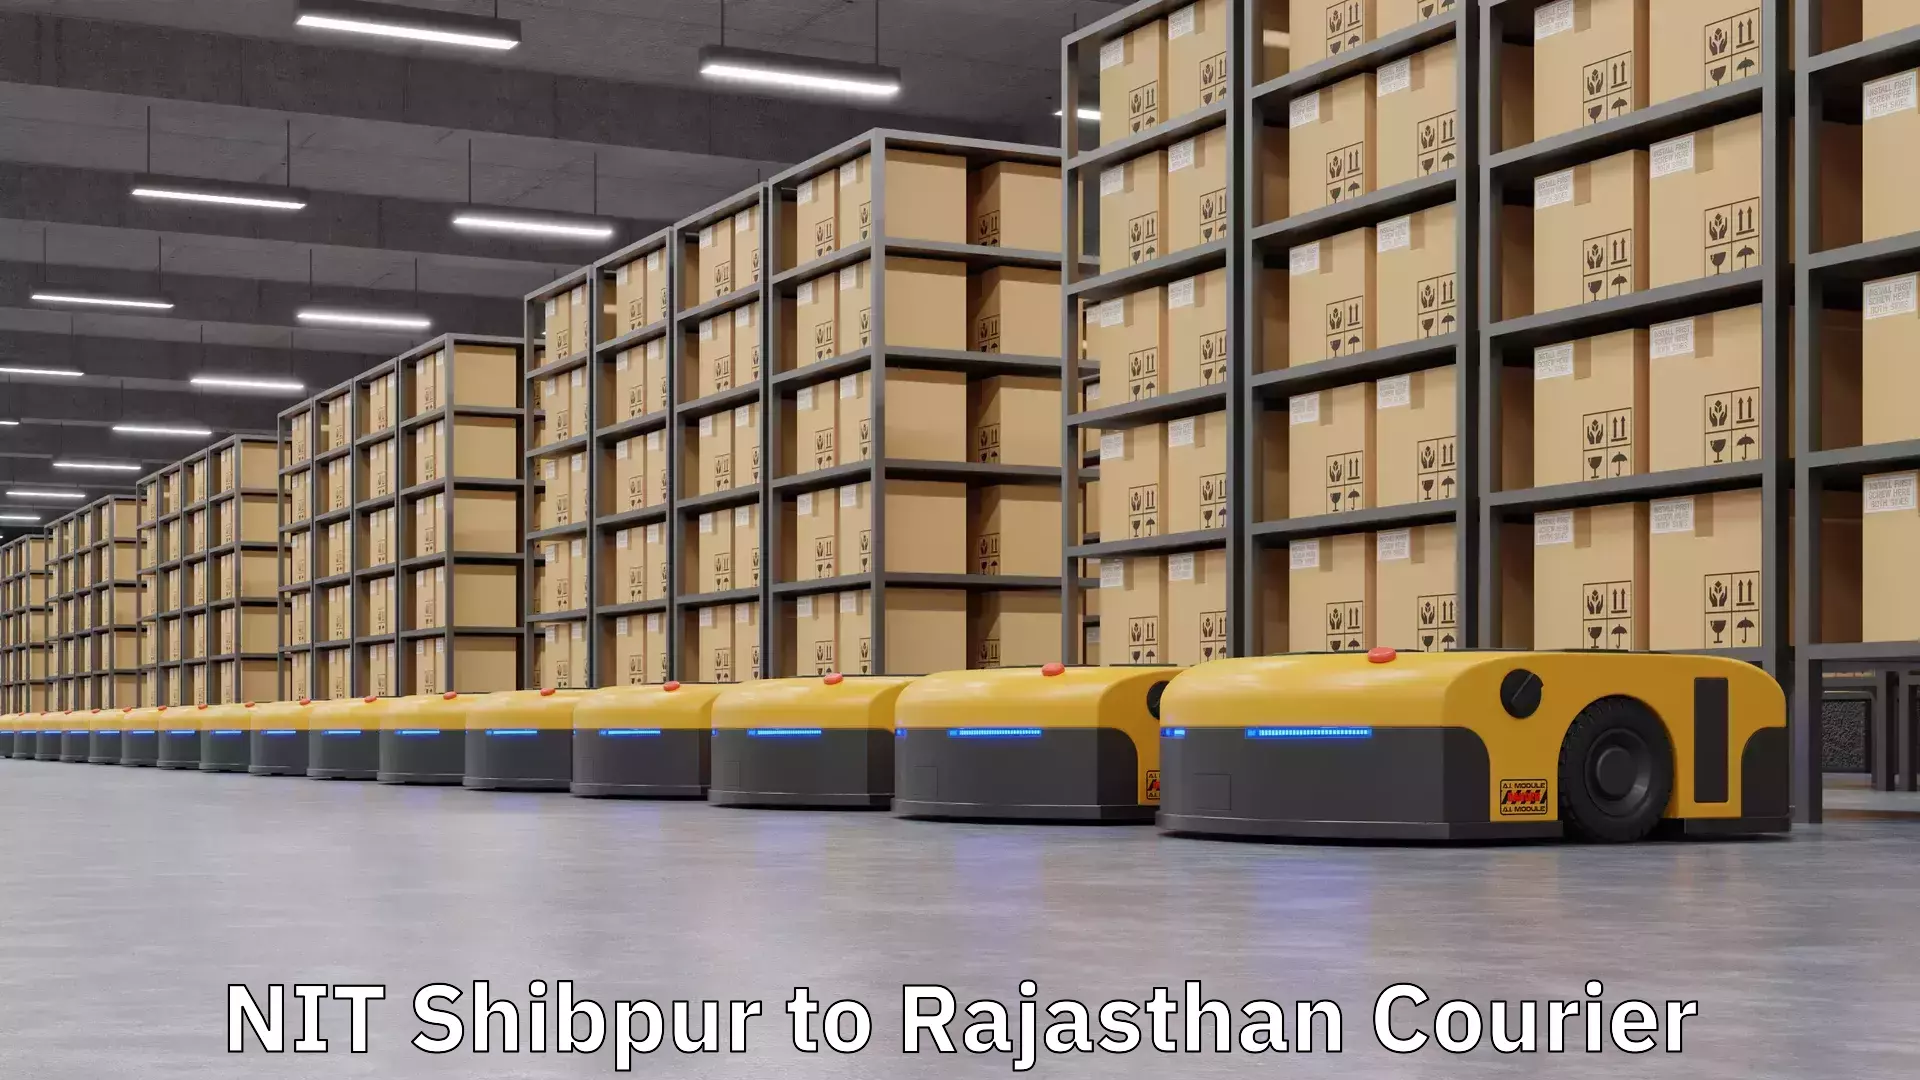 Express delivery solutions NIT Shibpur to Rajasthan